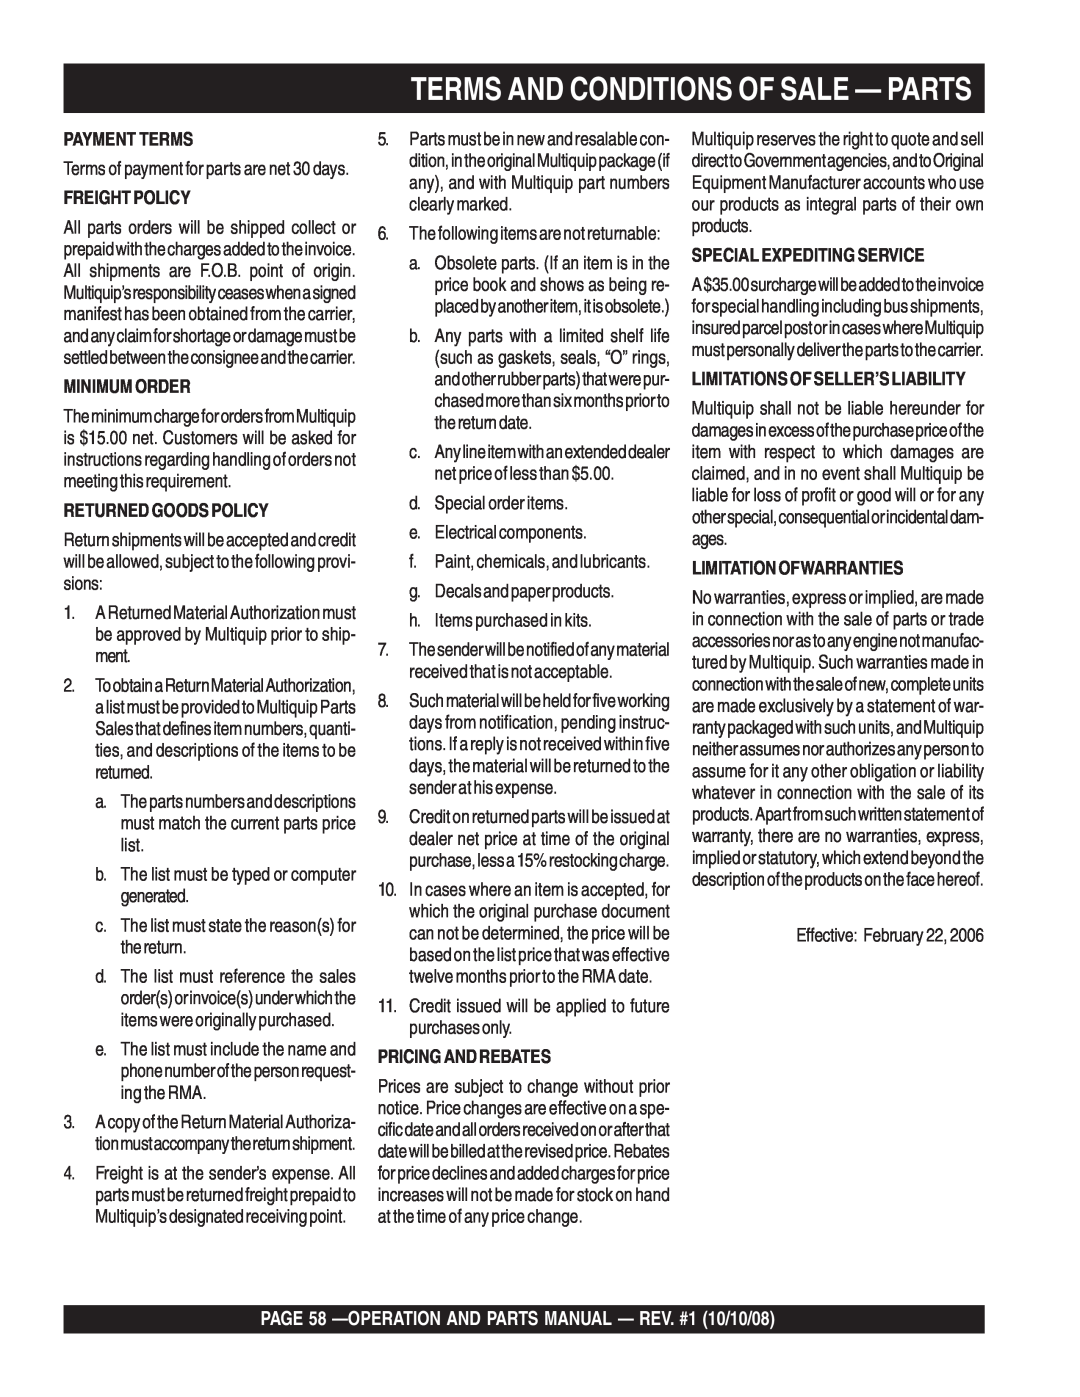 Multiquip QP4TE manual Terms And Conditions Of Sale - Parts, PAGE 58 -OPERATION AND PARTS MANUAL - REV. #1 10/10/08 